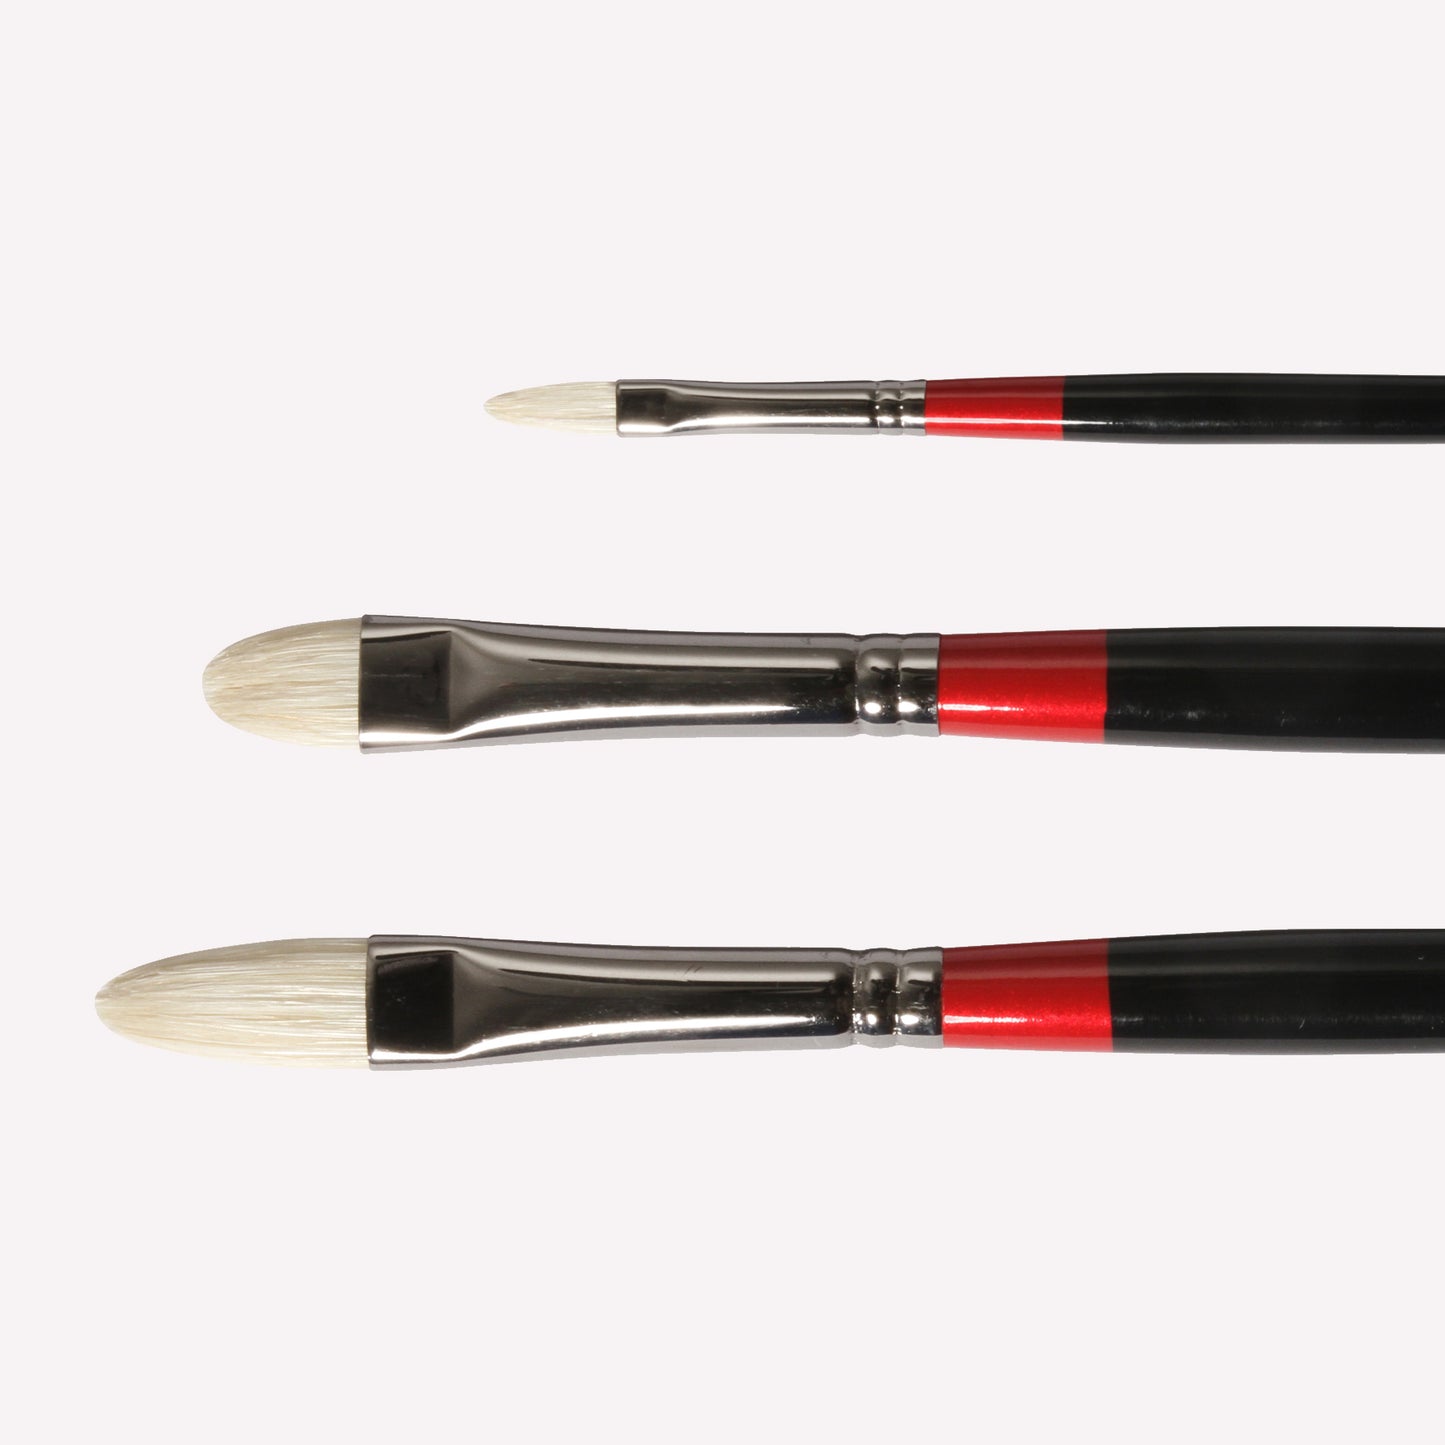 Daler-Rowney Georgian Filbert paintbrushes, available in sizes 2, 6 and short 6 . Brushes have a classy black handle with red detailing and a silver ferrule. 